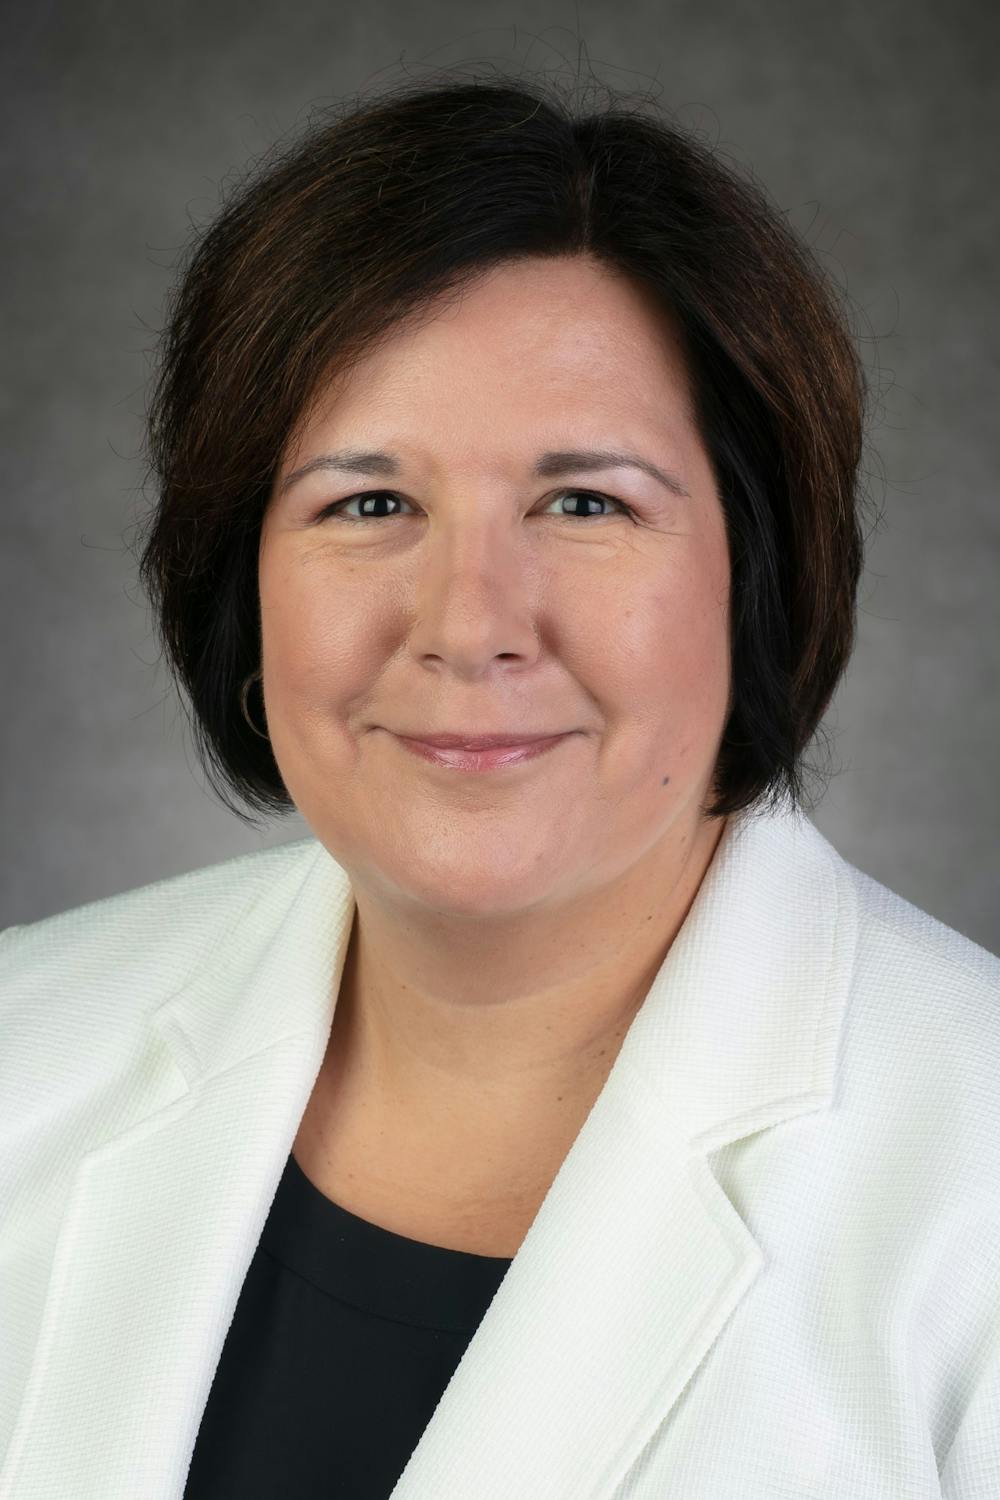 <p>Paula Luff currently serves as the interim vice president for enrollment management at DePaul University in Chicago. Effective April 20, Luff will serve as Ball State's next vice president of enrollment planning and management. <strong>Ball State University, Photo Provided</strong></p>